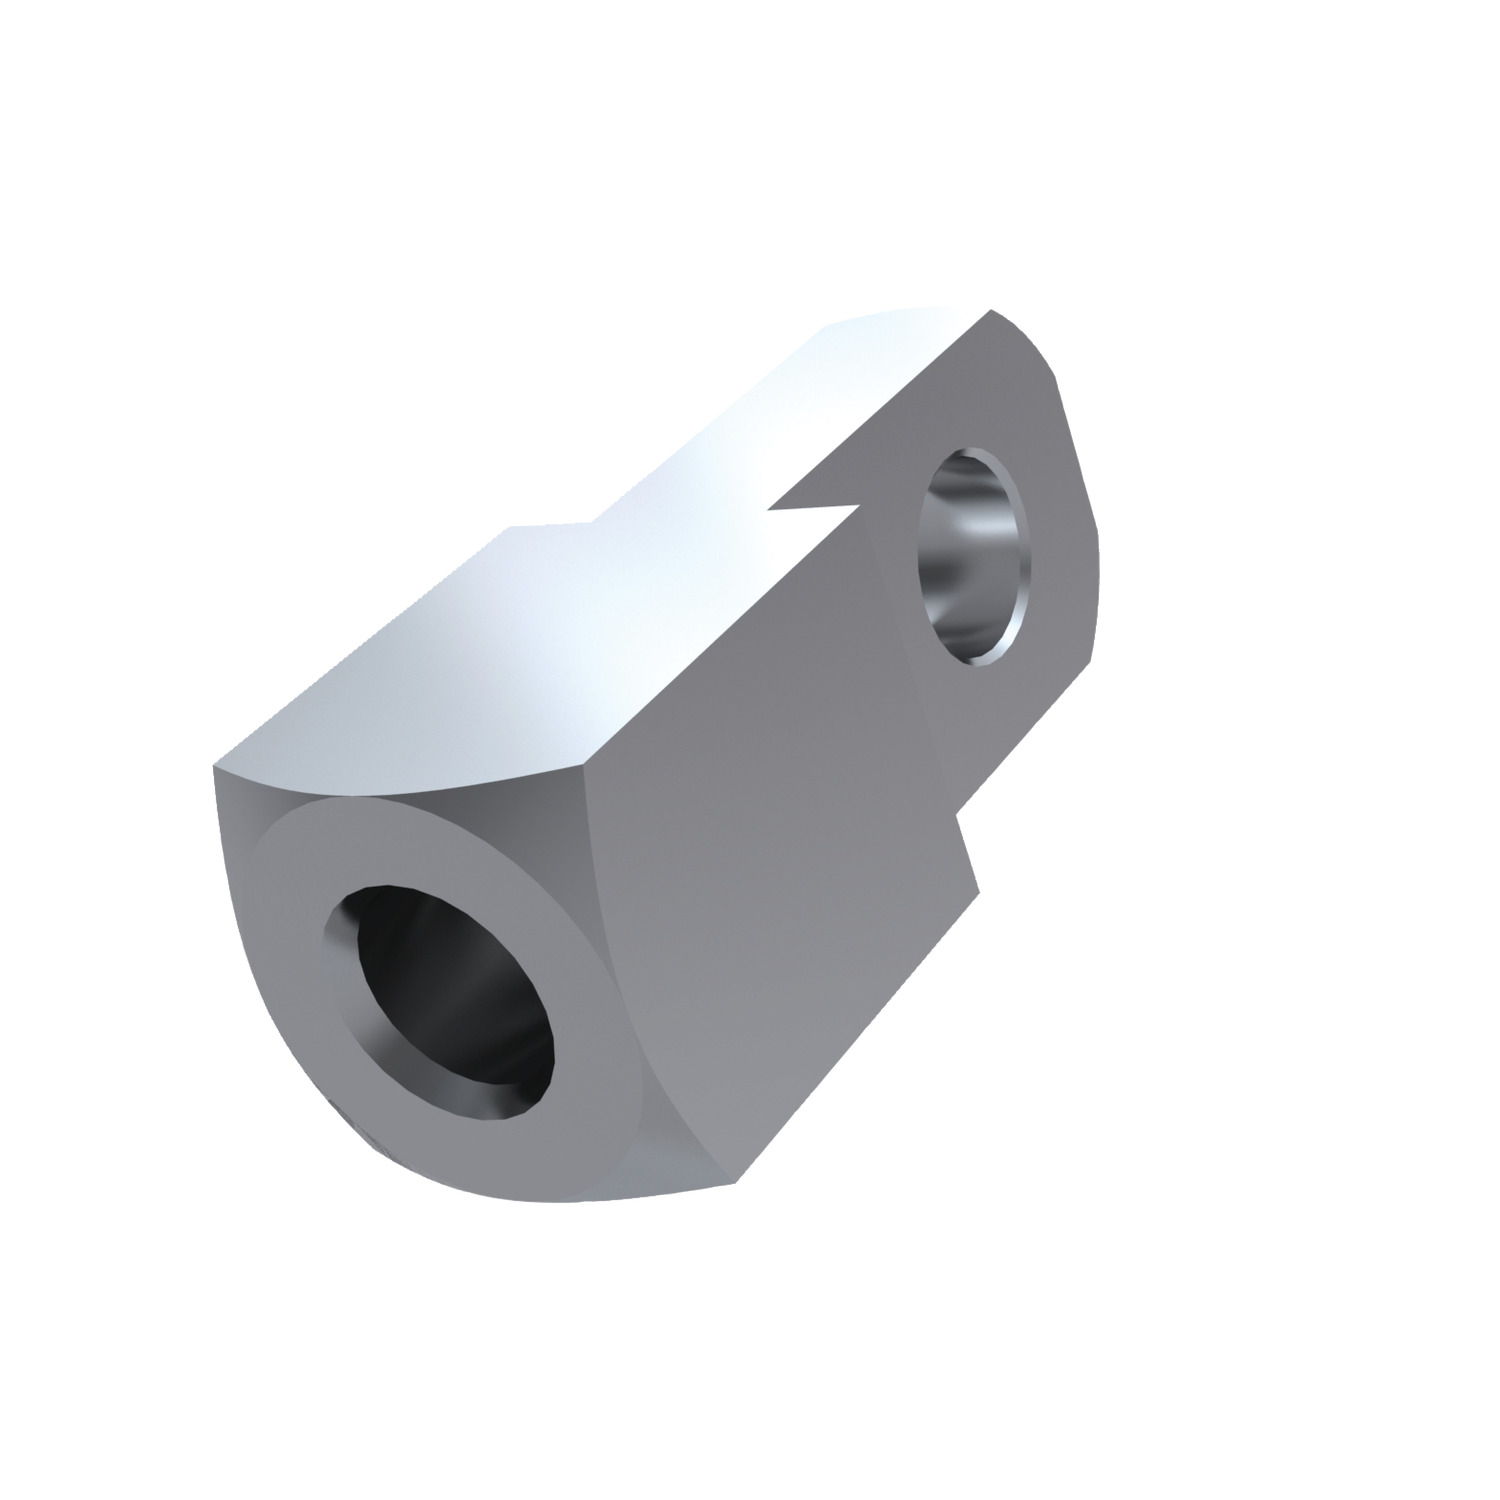 Mating Piece for Clevis Joints Female clevis mating pieces designed specifically for use with our clevis joints, fitting perfectly between the forks of the clevis to create a flexible fastening assembly.